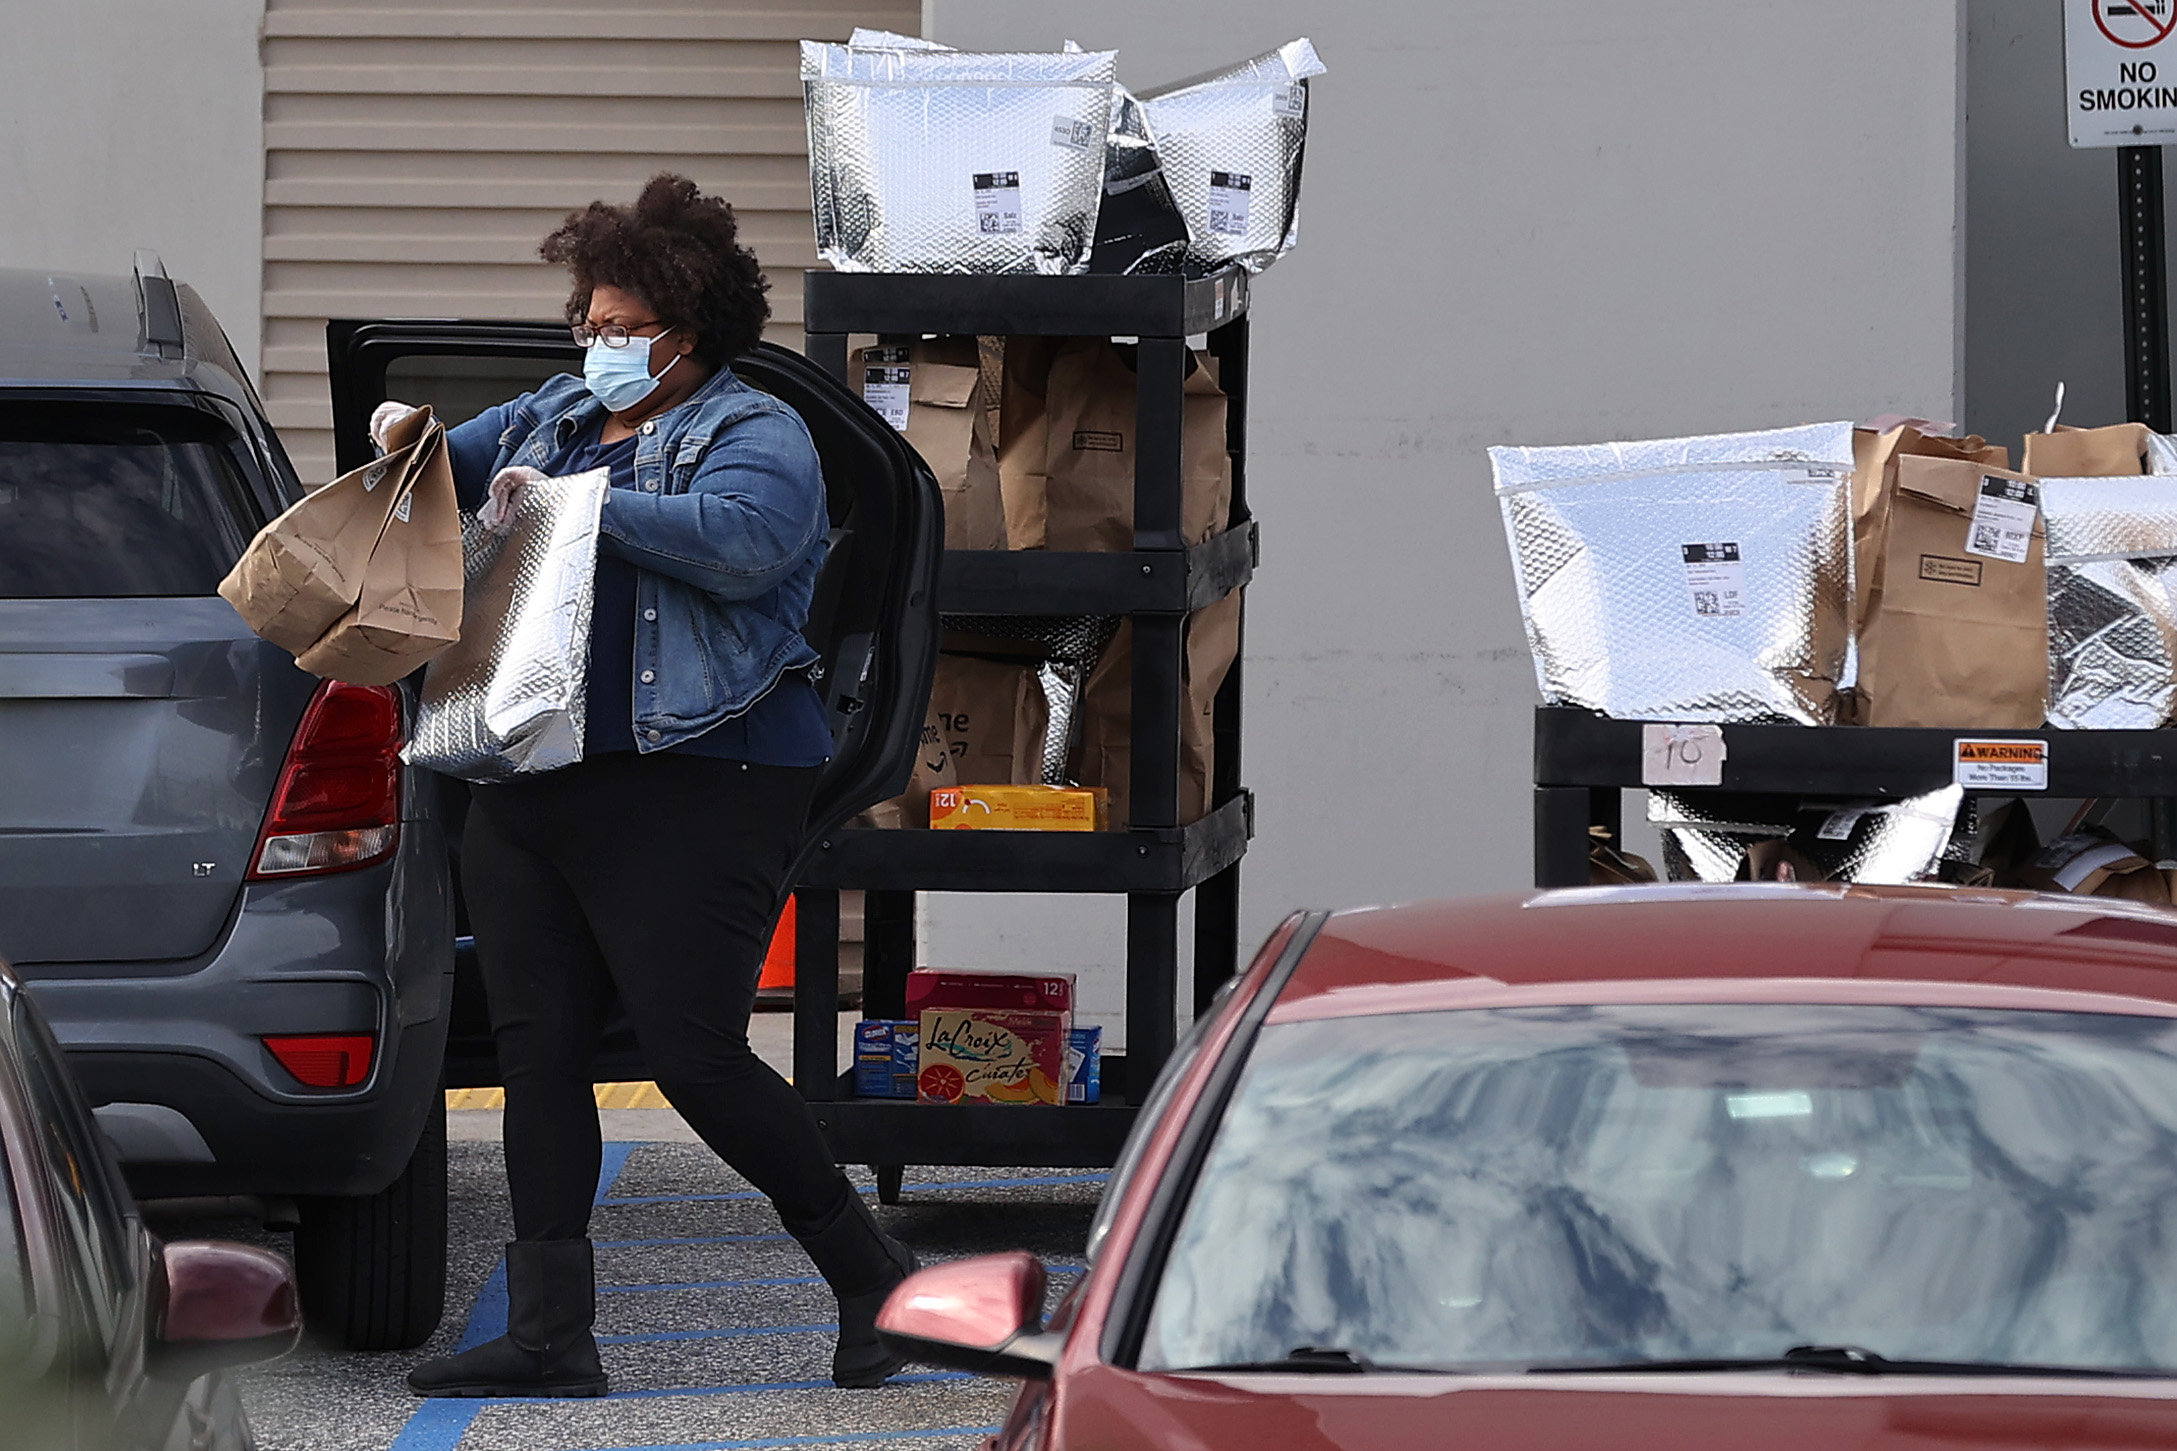 An Amazon Flex driver loads their personal vehicle with packages outside the 1.2 million-square-foot BWI2 Amazon Fulfillment Center in the Chesapeake Commerce Center April 14, 2020 in Baltimore, Maryland. While some workers across the country have expressed concern about what steps Amazon is doing to protect workers from COVID-19, the online retailer hired 100,000 people in March says it wants to add another 75,000 full and part-time jobs due to rising demand during the coronavirus pandemic. (Photo by Chip Somodevilla/Getty Images)